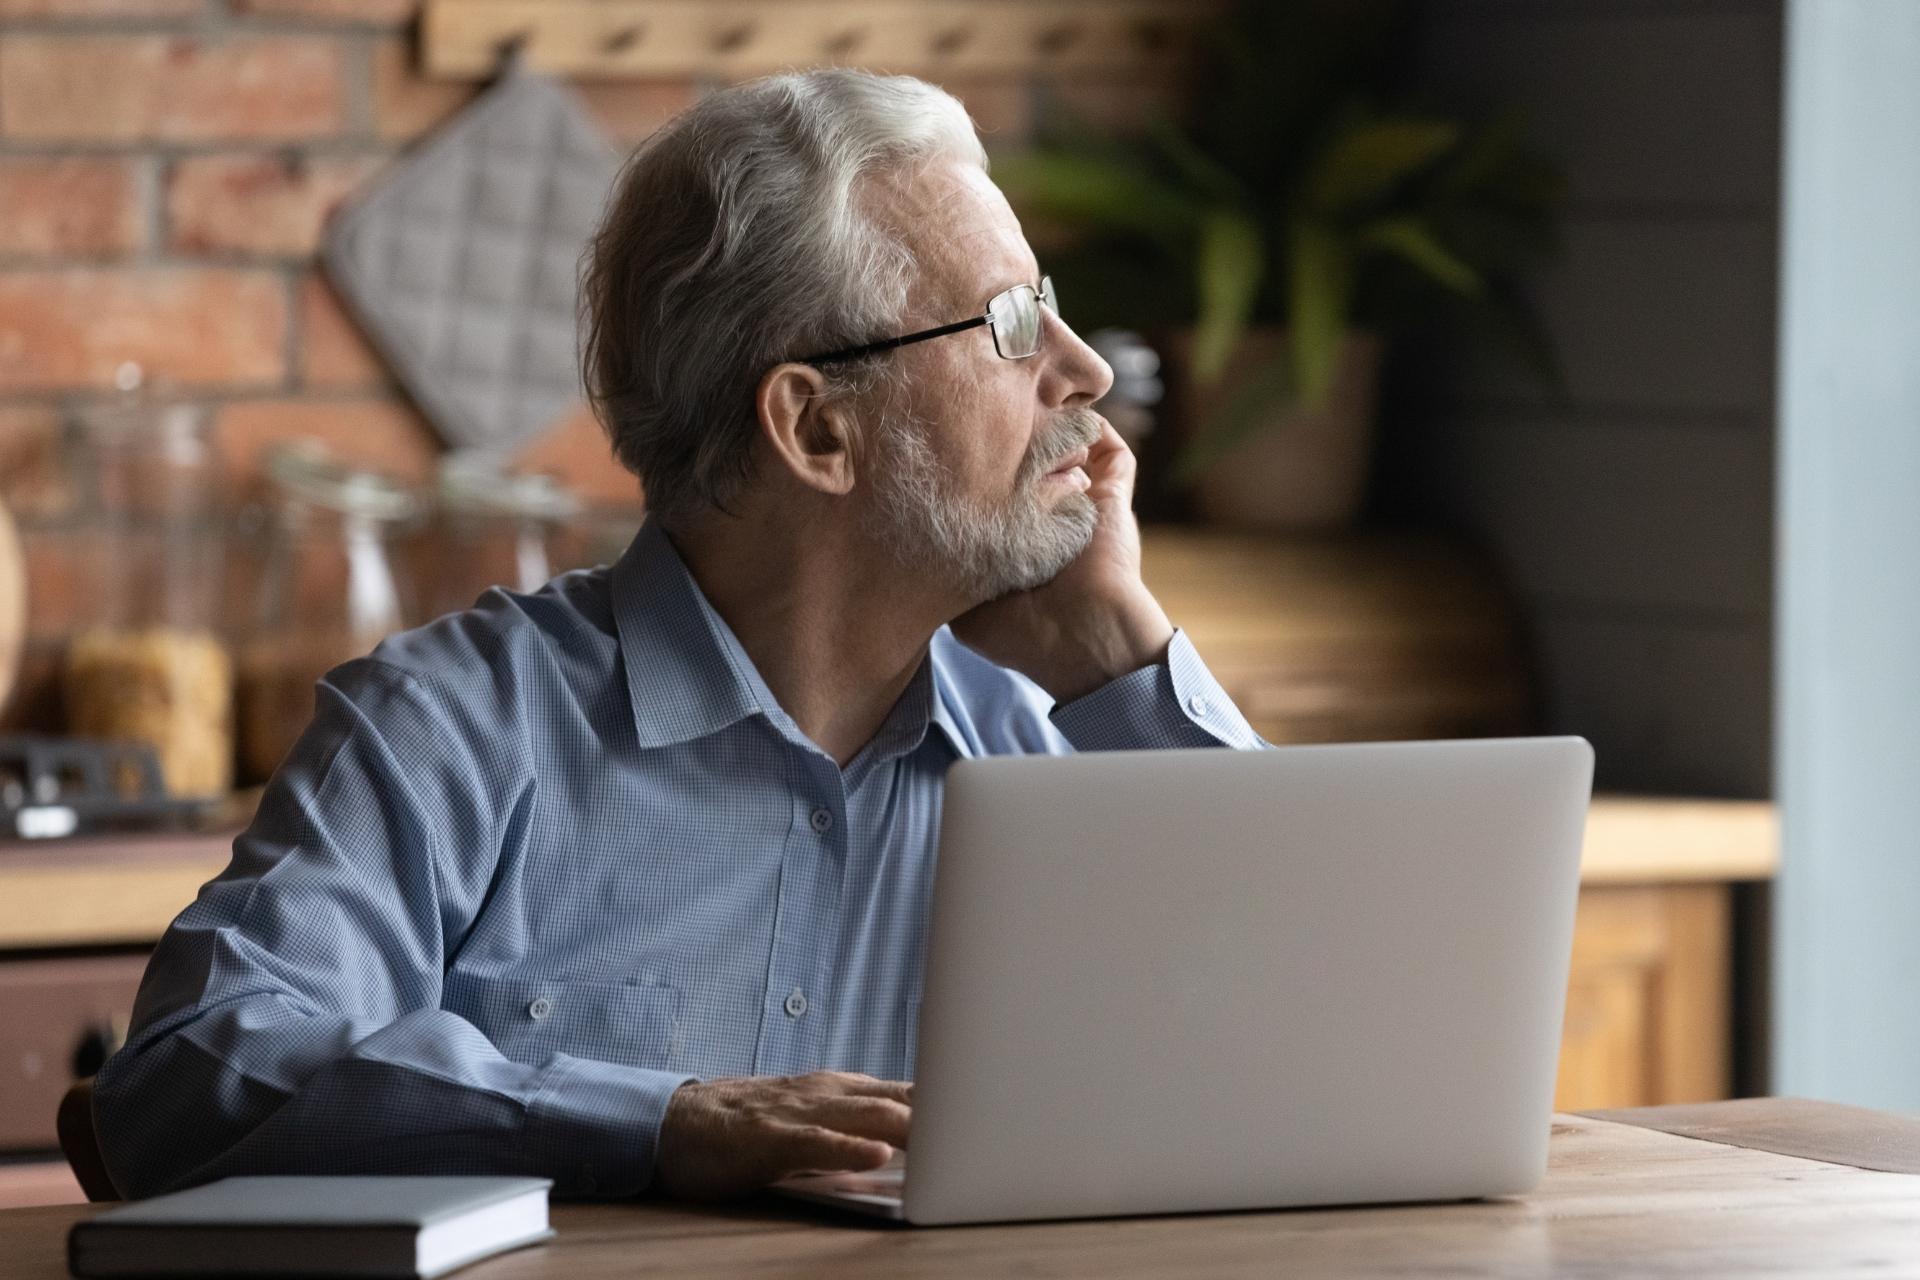 Older wellness-focused white man sitting at laptop in his kitchen, staring out window as he thinks about his CBD questions for Leaf411.